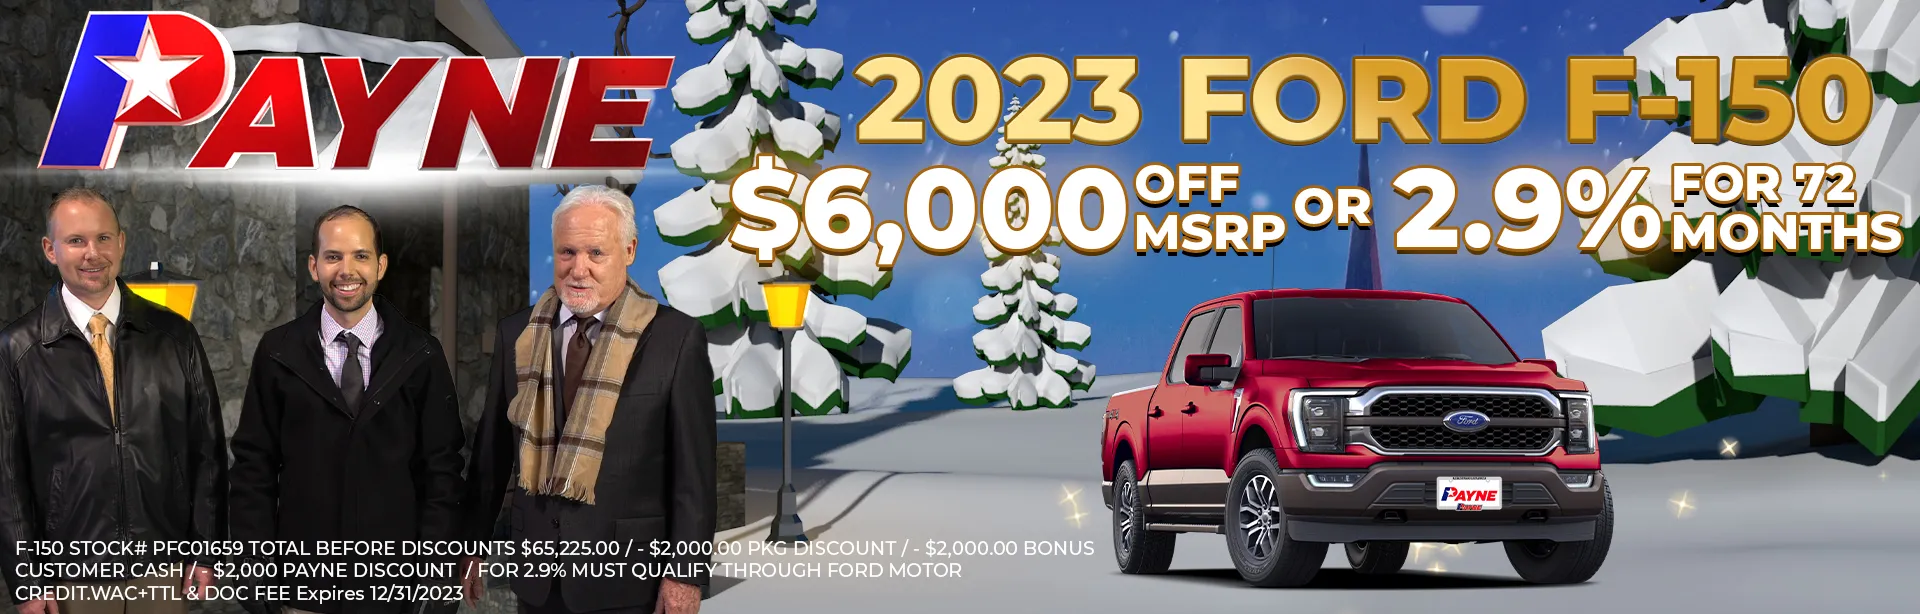 $6,000 off MSRP or 2.9% for 72 months on 2023 Ford F-150